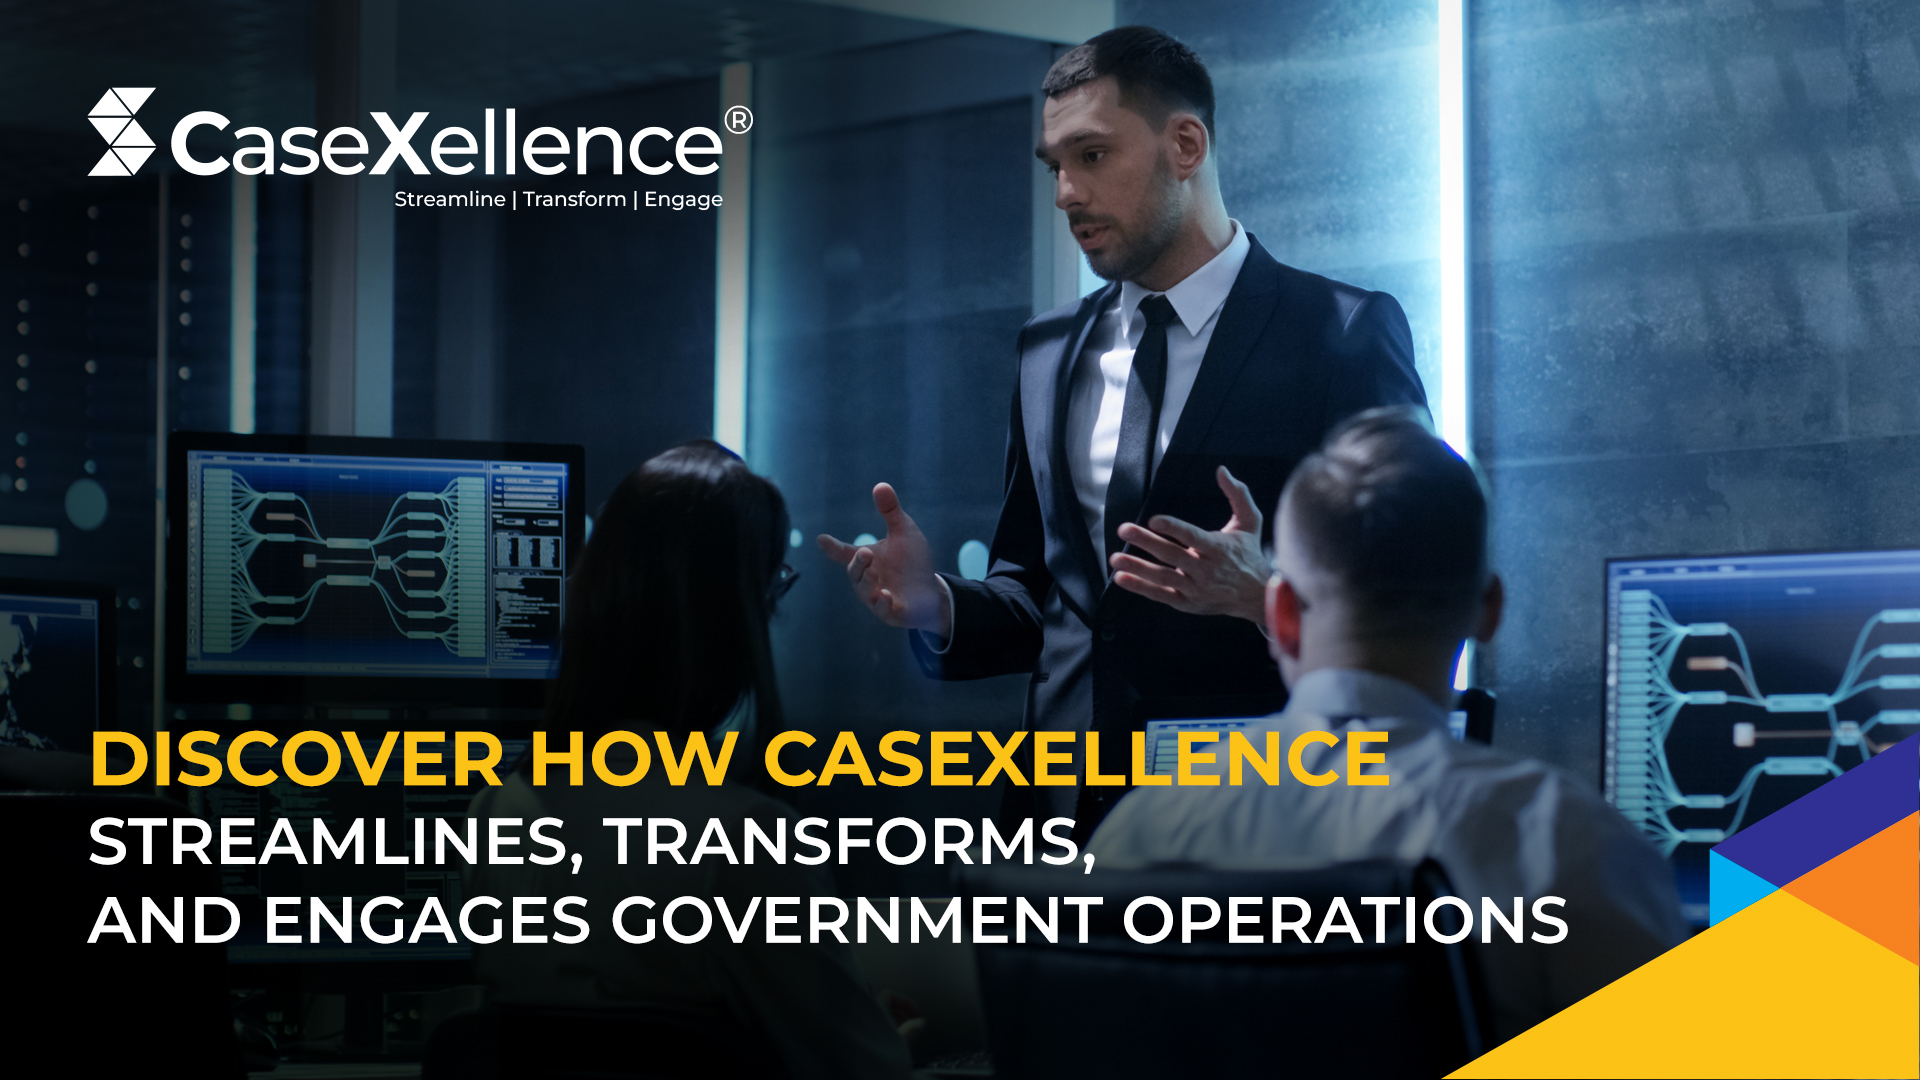 Discover How CaseXellence Streamlines, Transforms, and Engages Government Operations